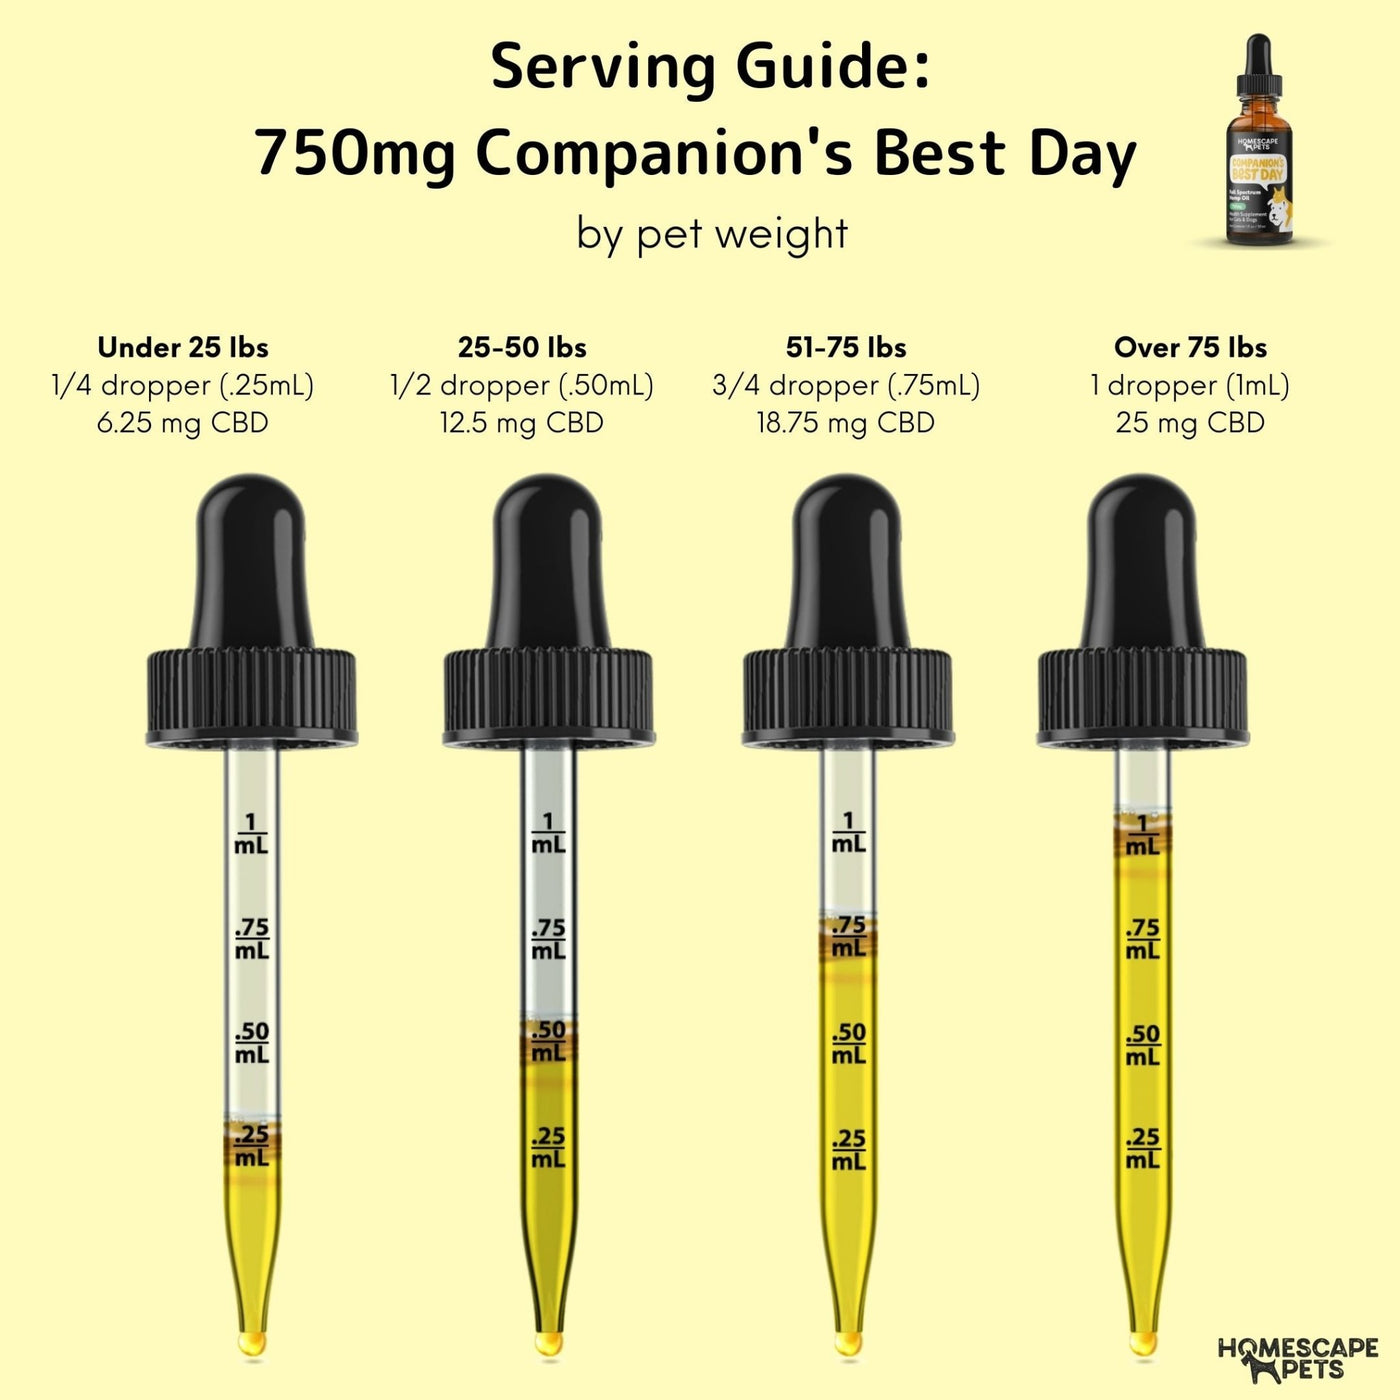 Companion's Best Day 750 - Homescape Pets - Serving Guide by pet weight showing 4 droppers of oil with varying amounts of oil inside the dropper to indicate how much should be given as a dose